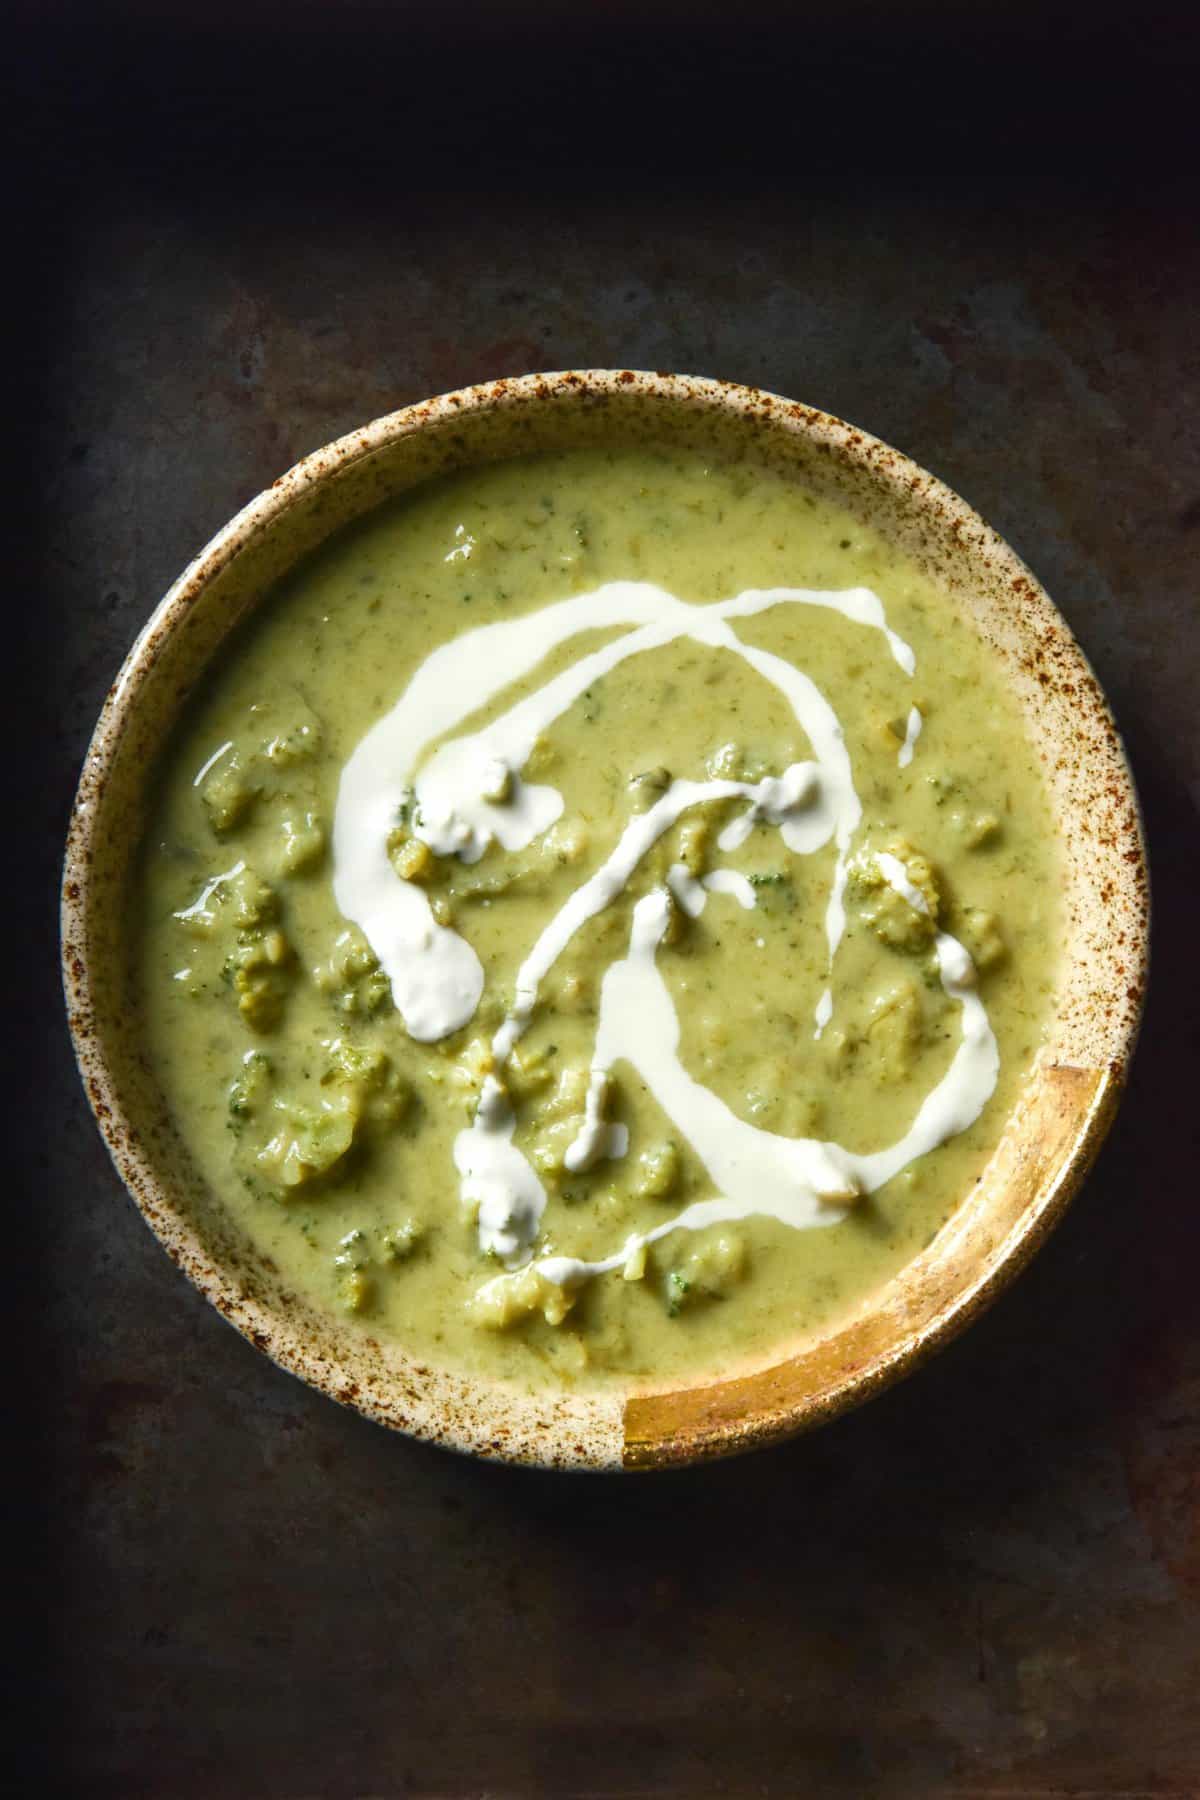 An aerial image of a beige speckled ceramic bowl of low FODMAP broccoli cheddar soup on a dark steel backdrop